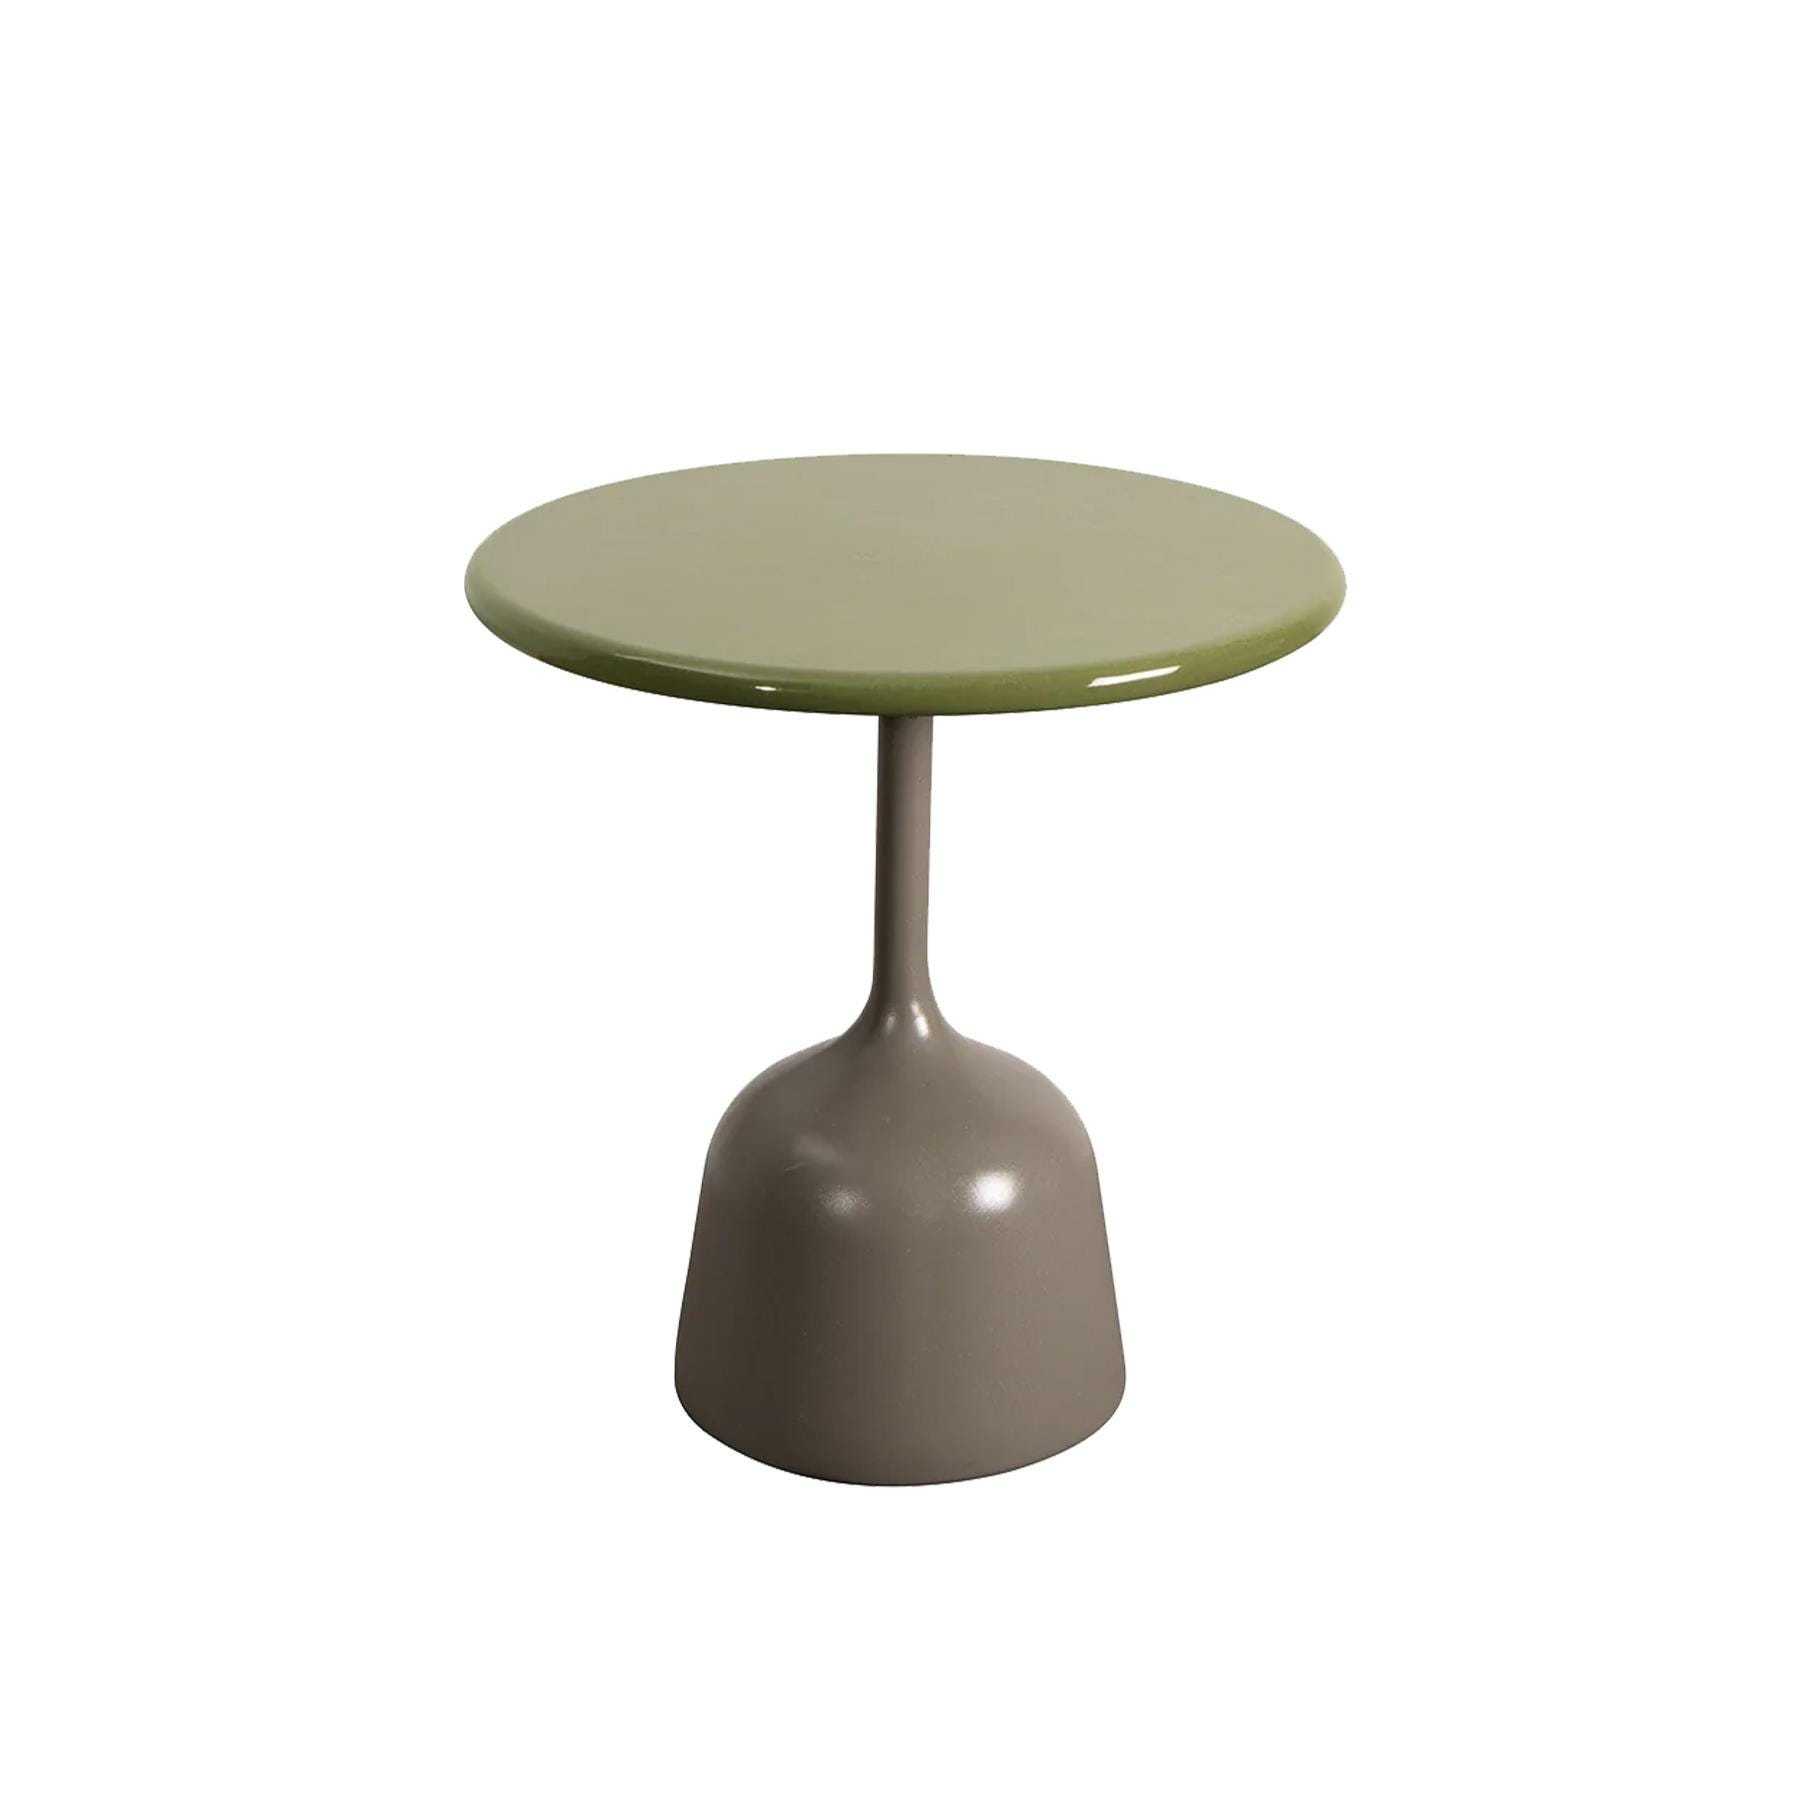 Caneline Glaze Coffee Table Small Taupe Base Green Lava Stone Top Designer Furniture From Holloways Of Ludlow